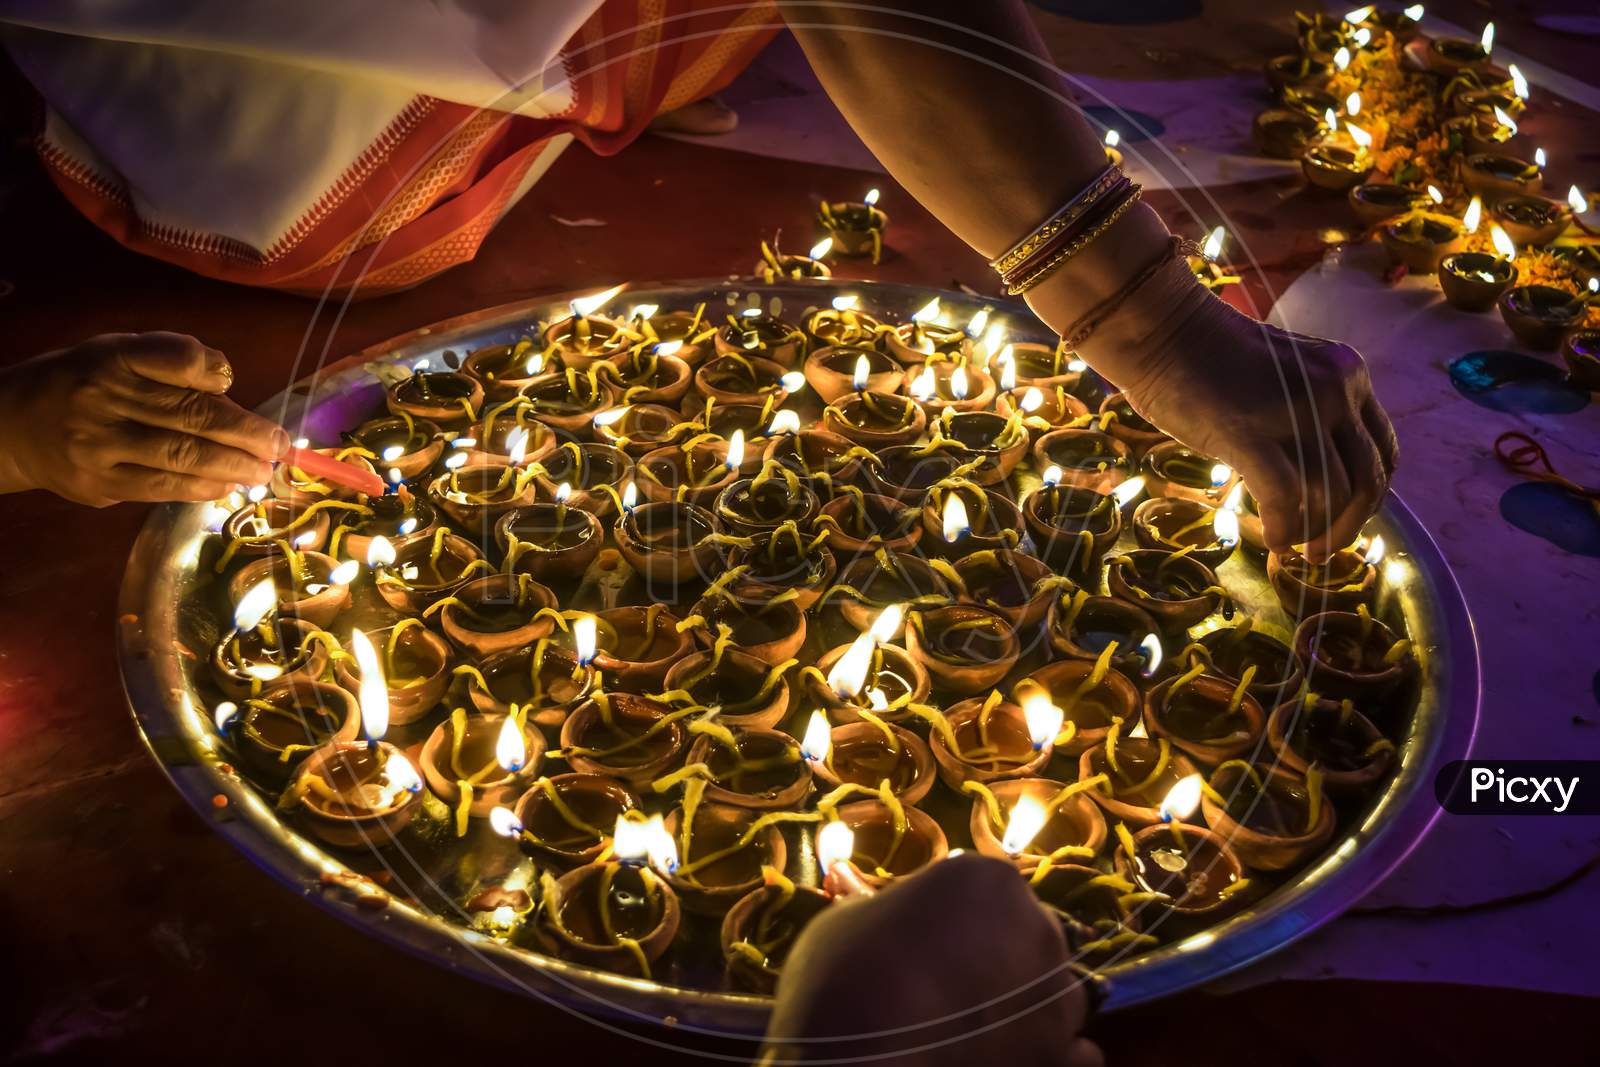 The Dish Is Filled With Diya Or Lamps Being Arranged For Worship